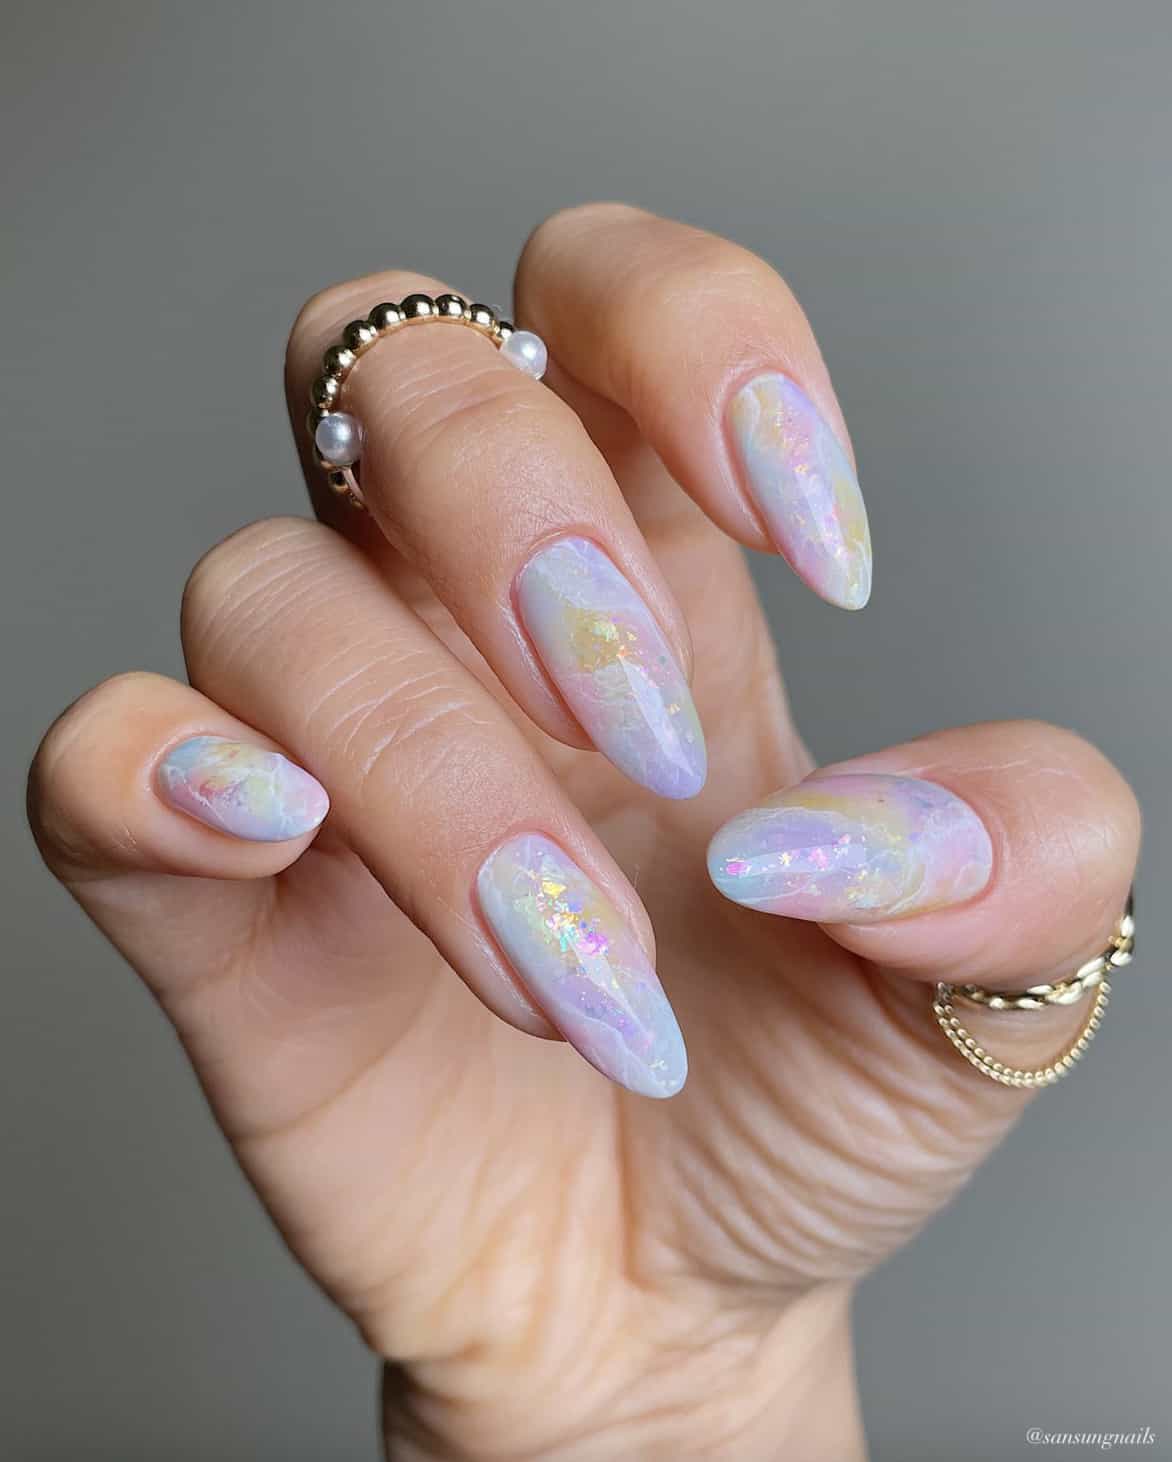 A hand with long almond nails painted with a marbled iridescent design